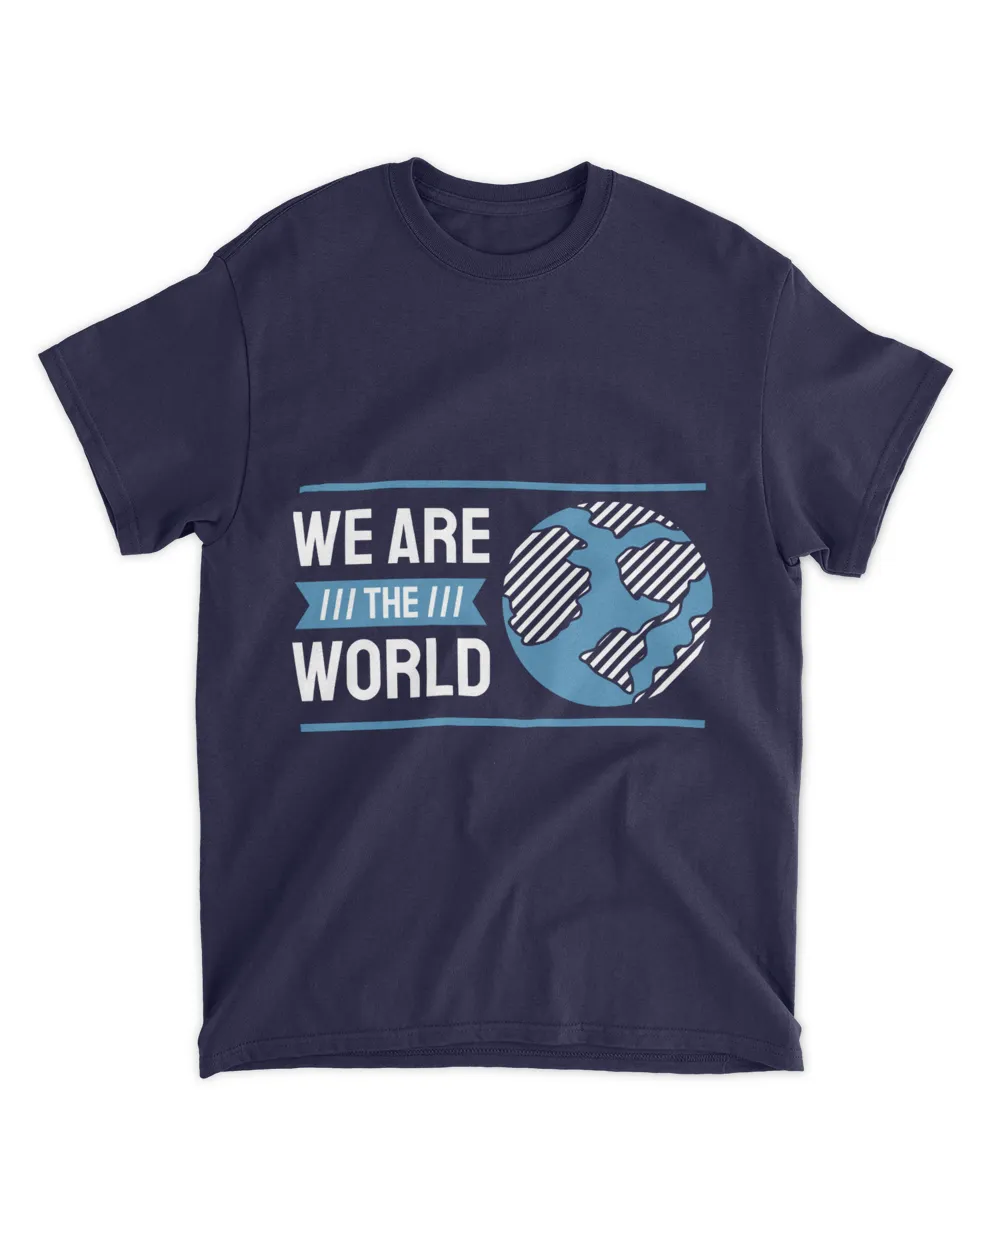 We Are The World (Earth Day Slogan T-Shirt)